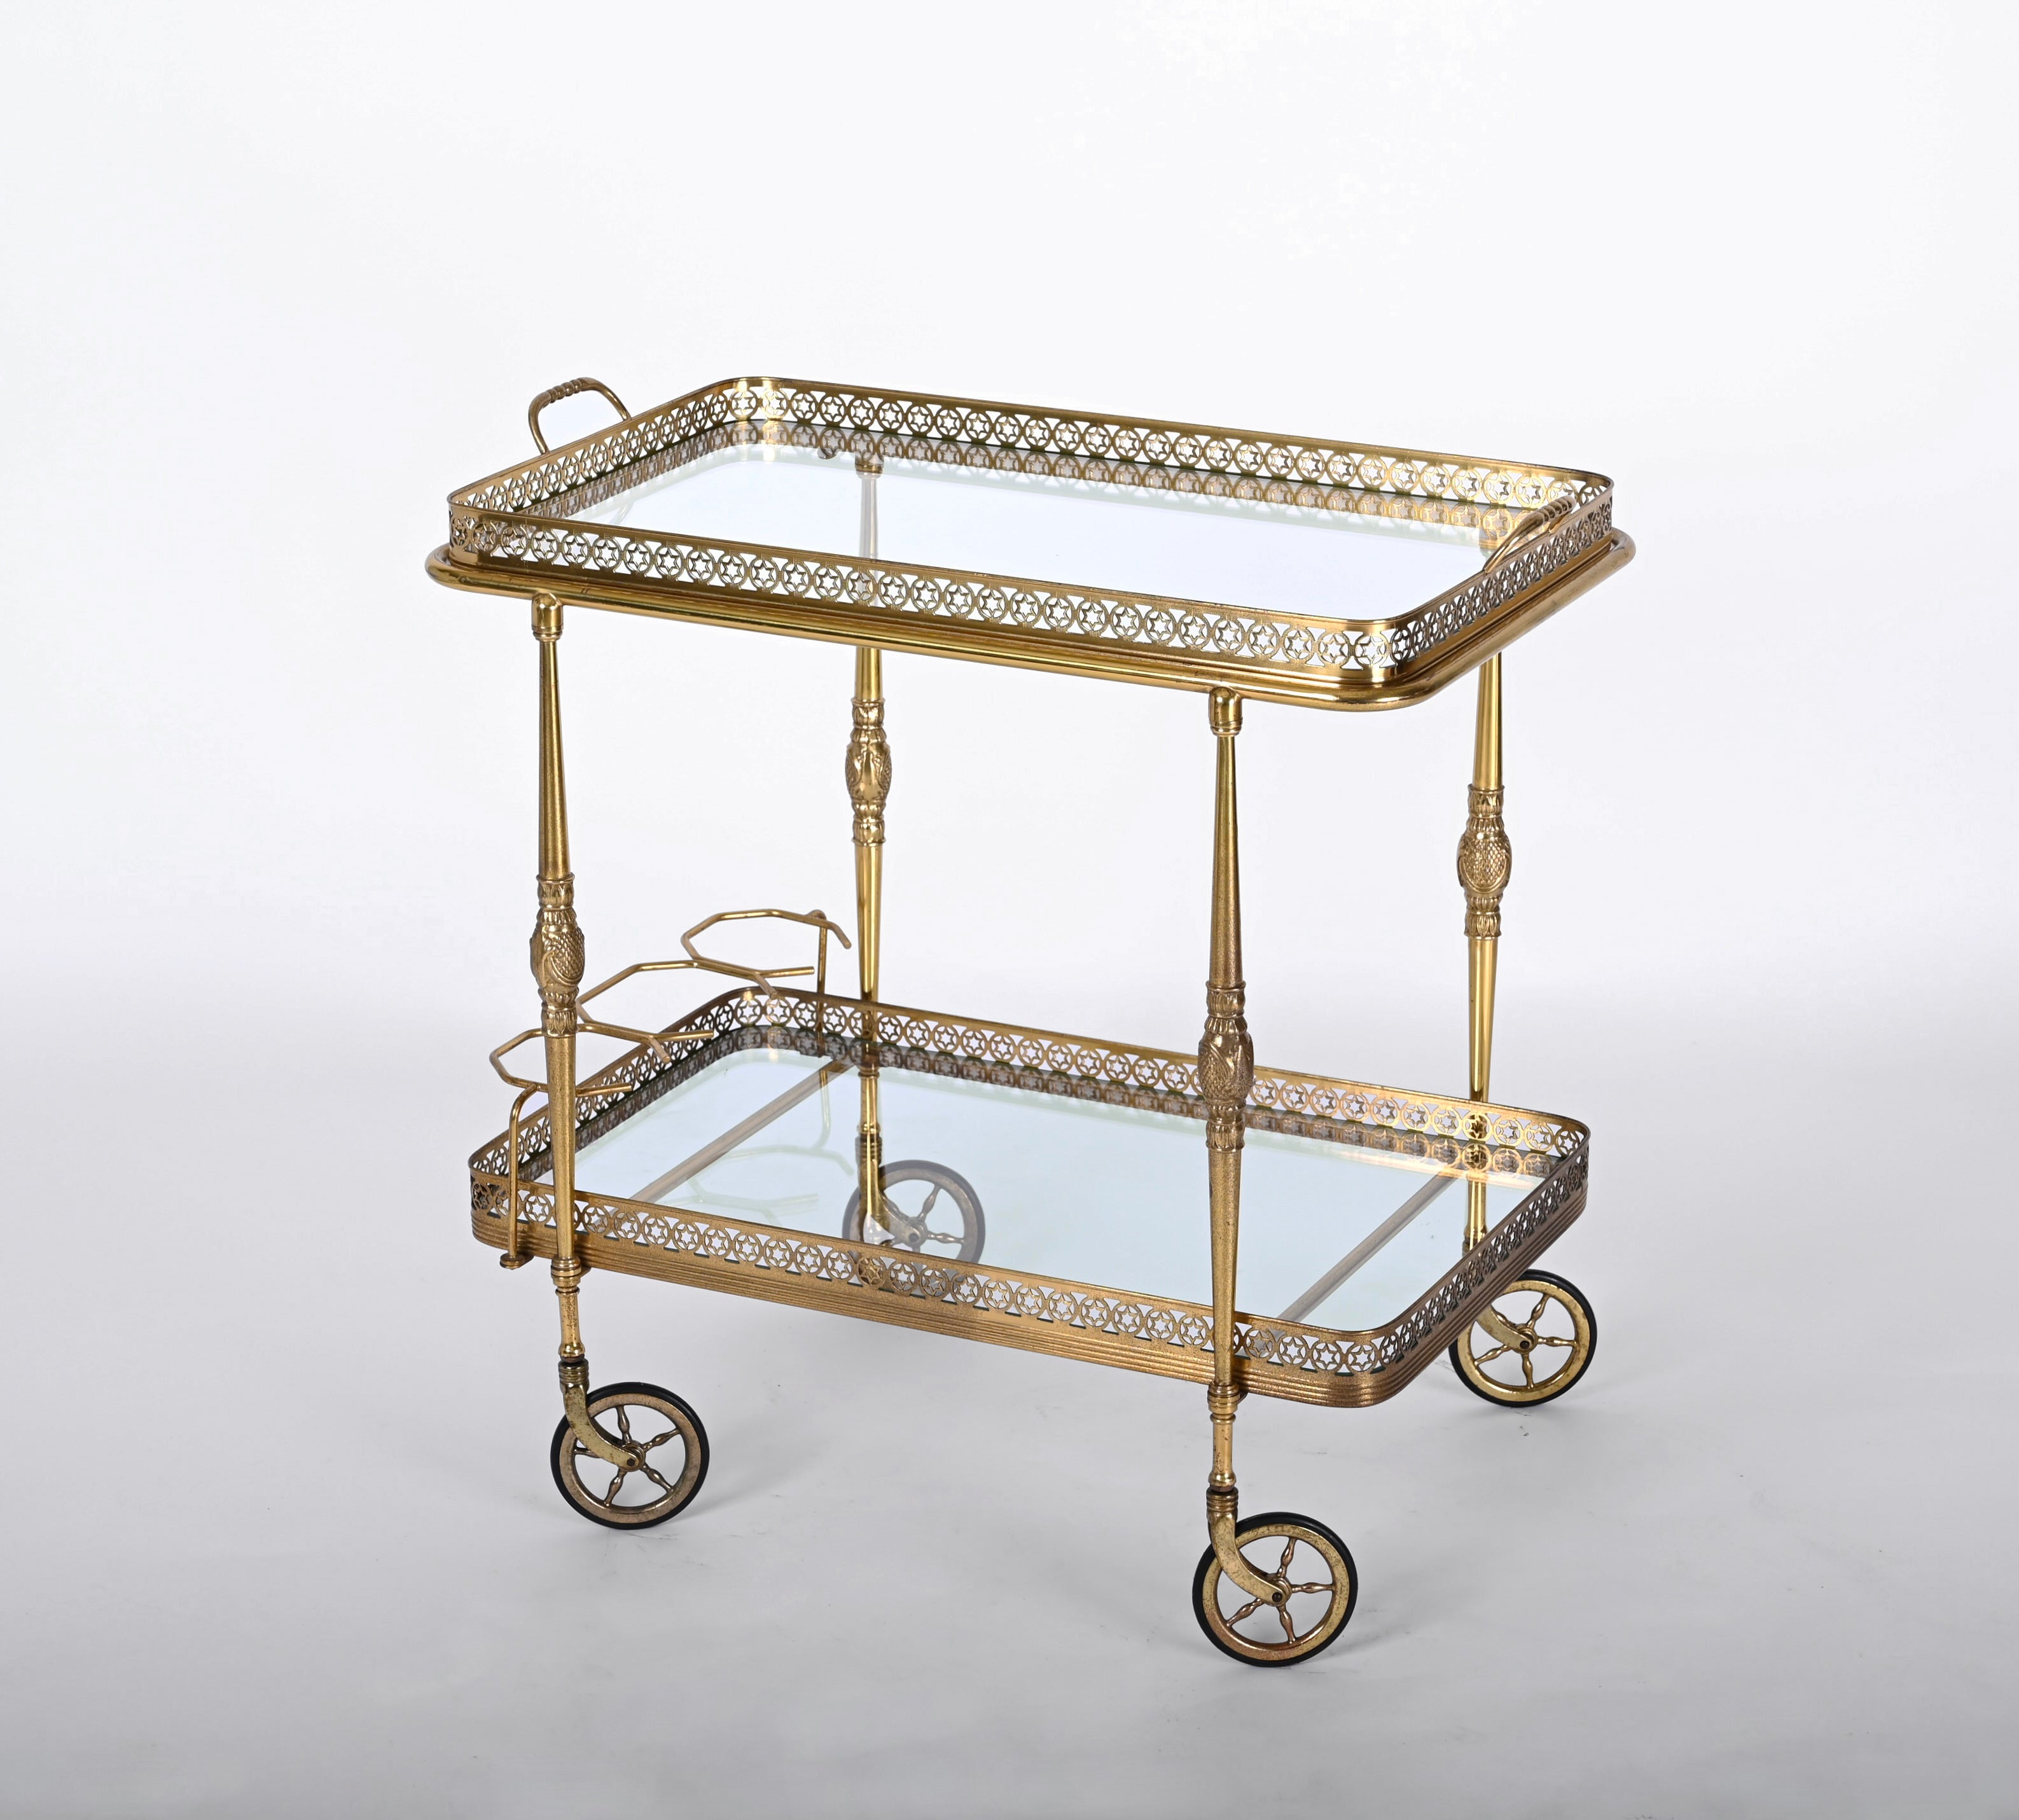 Magnificent brass and crystal glass serving bar trolley with two levels. This serving trolley was produced by Maison Baguès in France during 1950s.

The structure of this unique piece is made in fully carved brass with stunning hand made sun